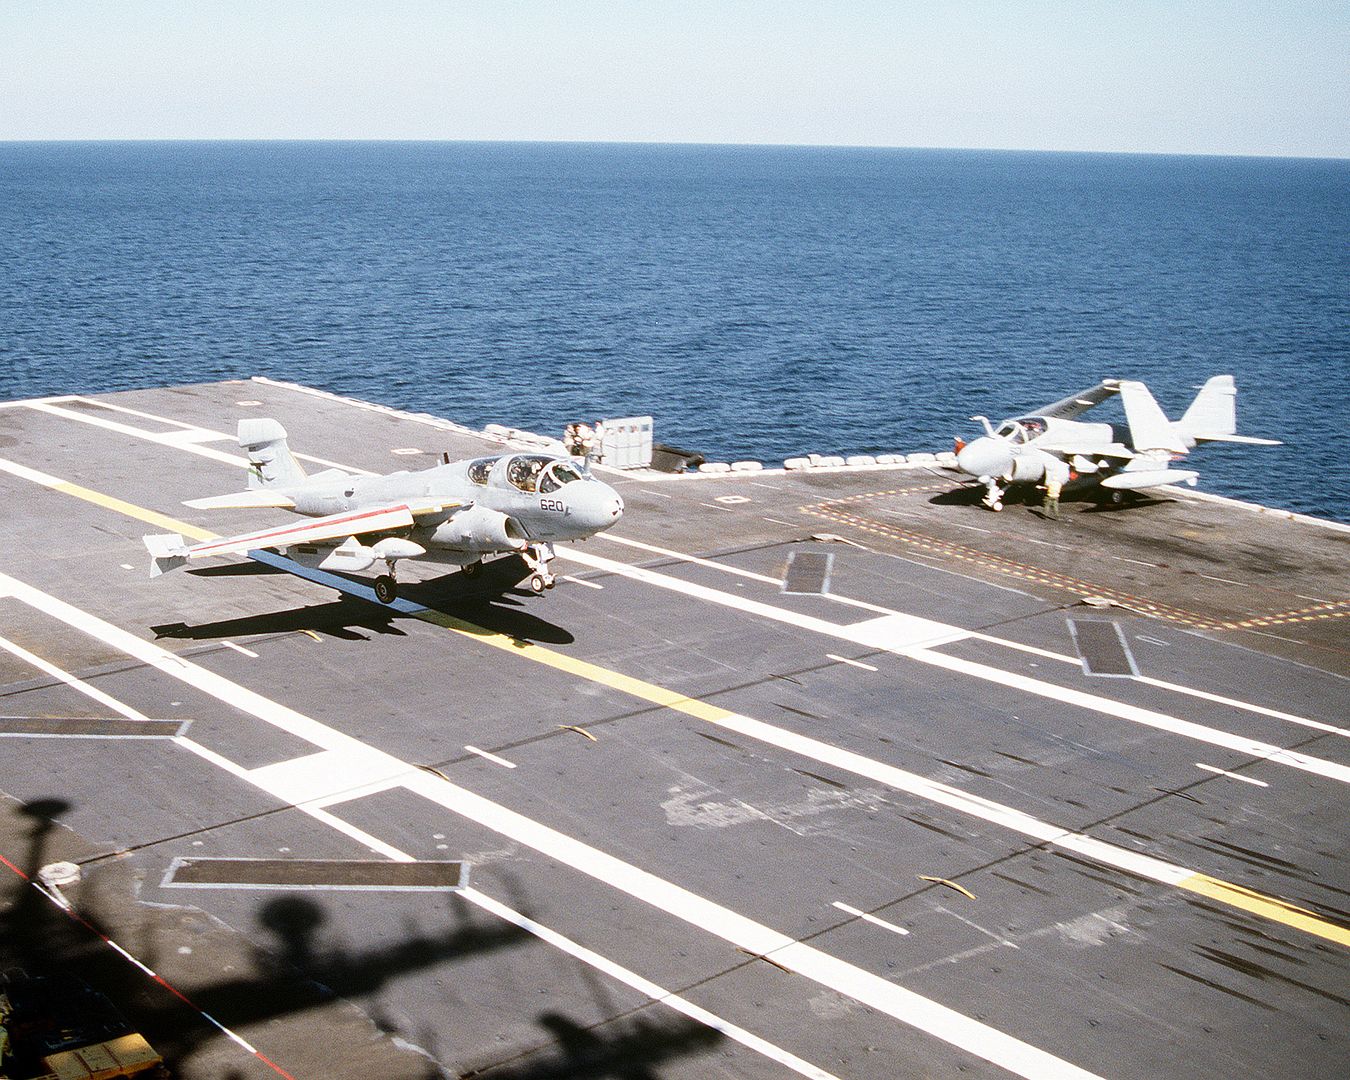 Powered Aircraft Carrier USS ABRAHAM LINCOLN